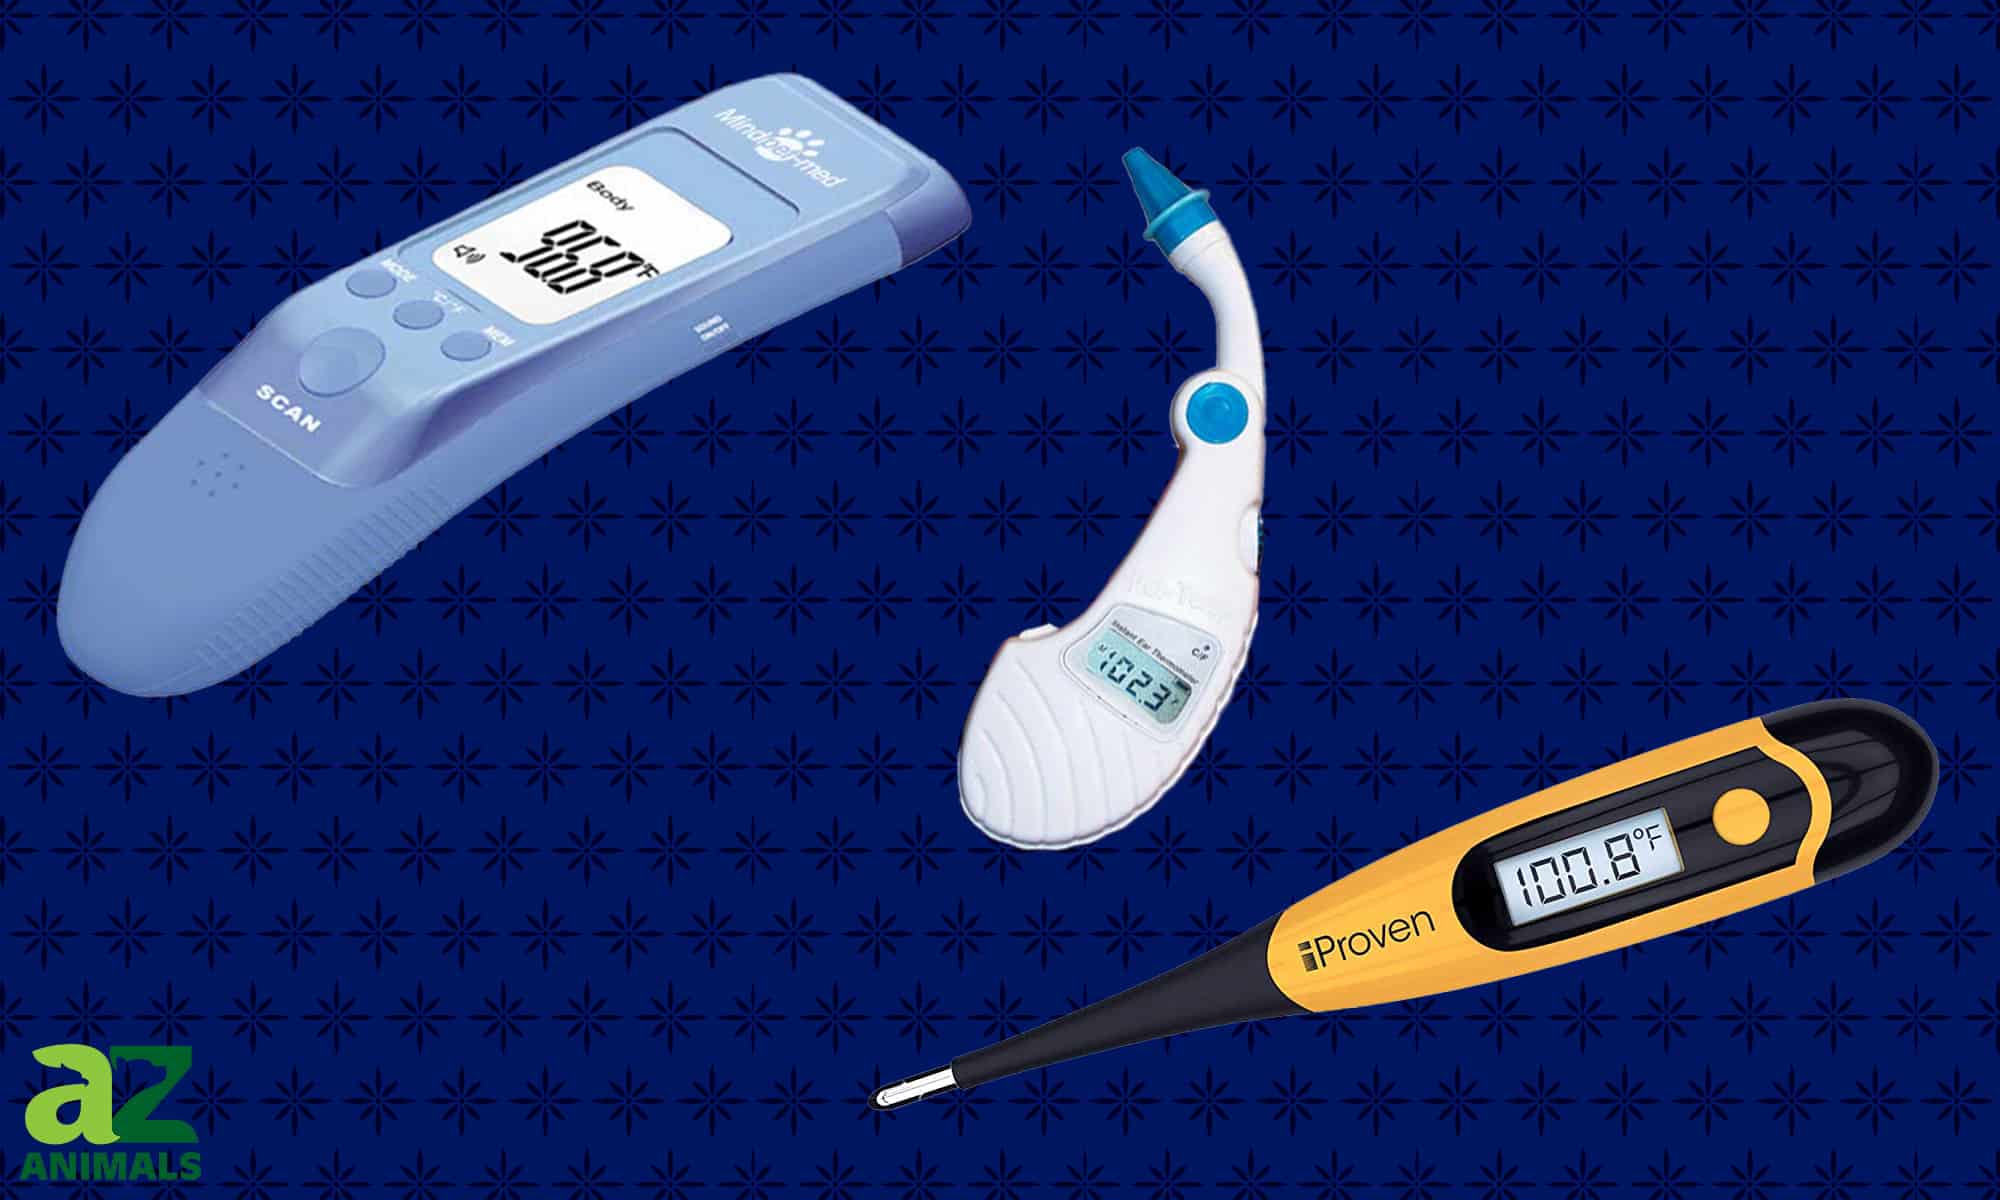 are ear thermometers accurate for dogs